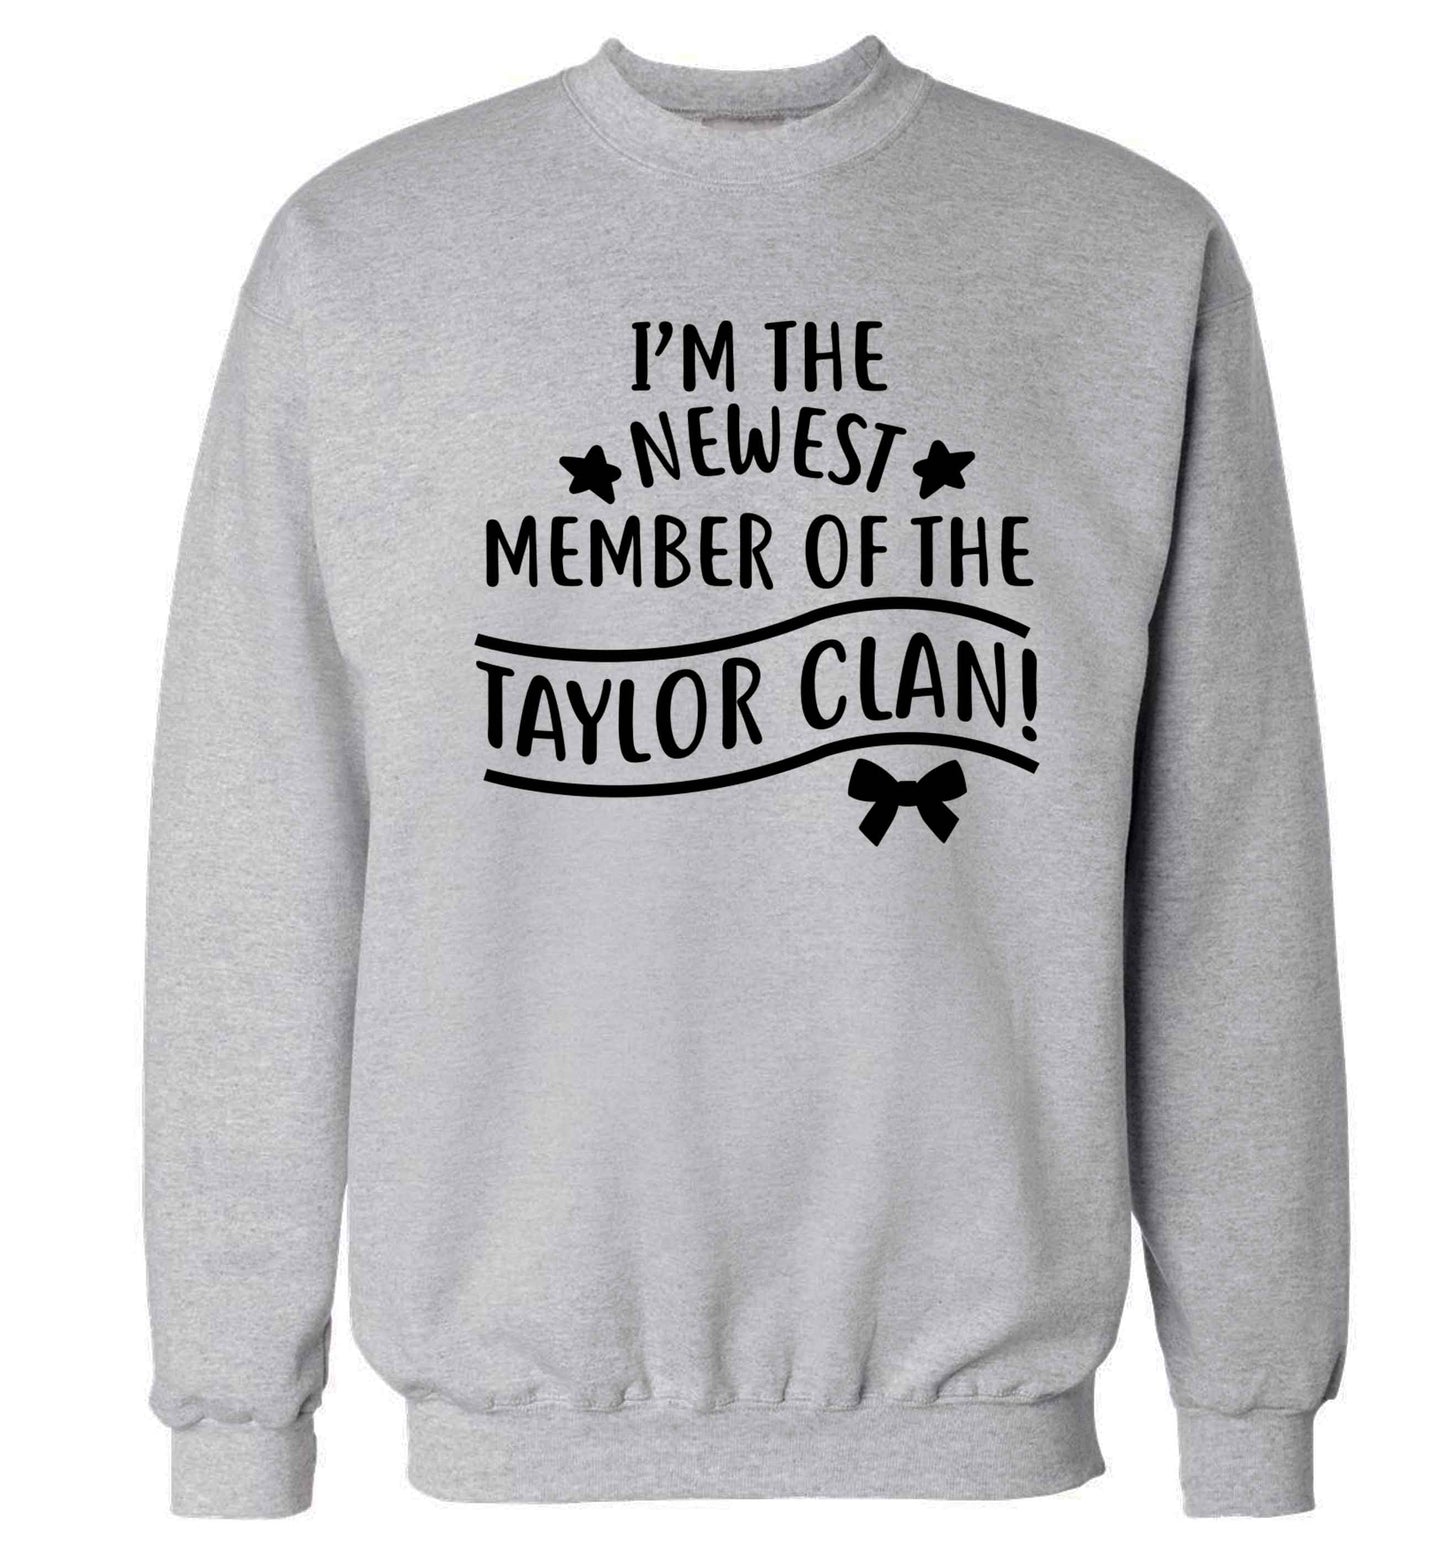 Personalised, newest member of the Taylor clan Adult's unisex grey Sweater 2XL